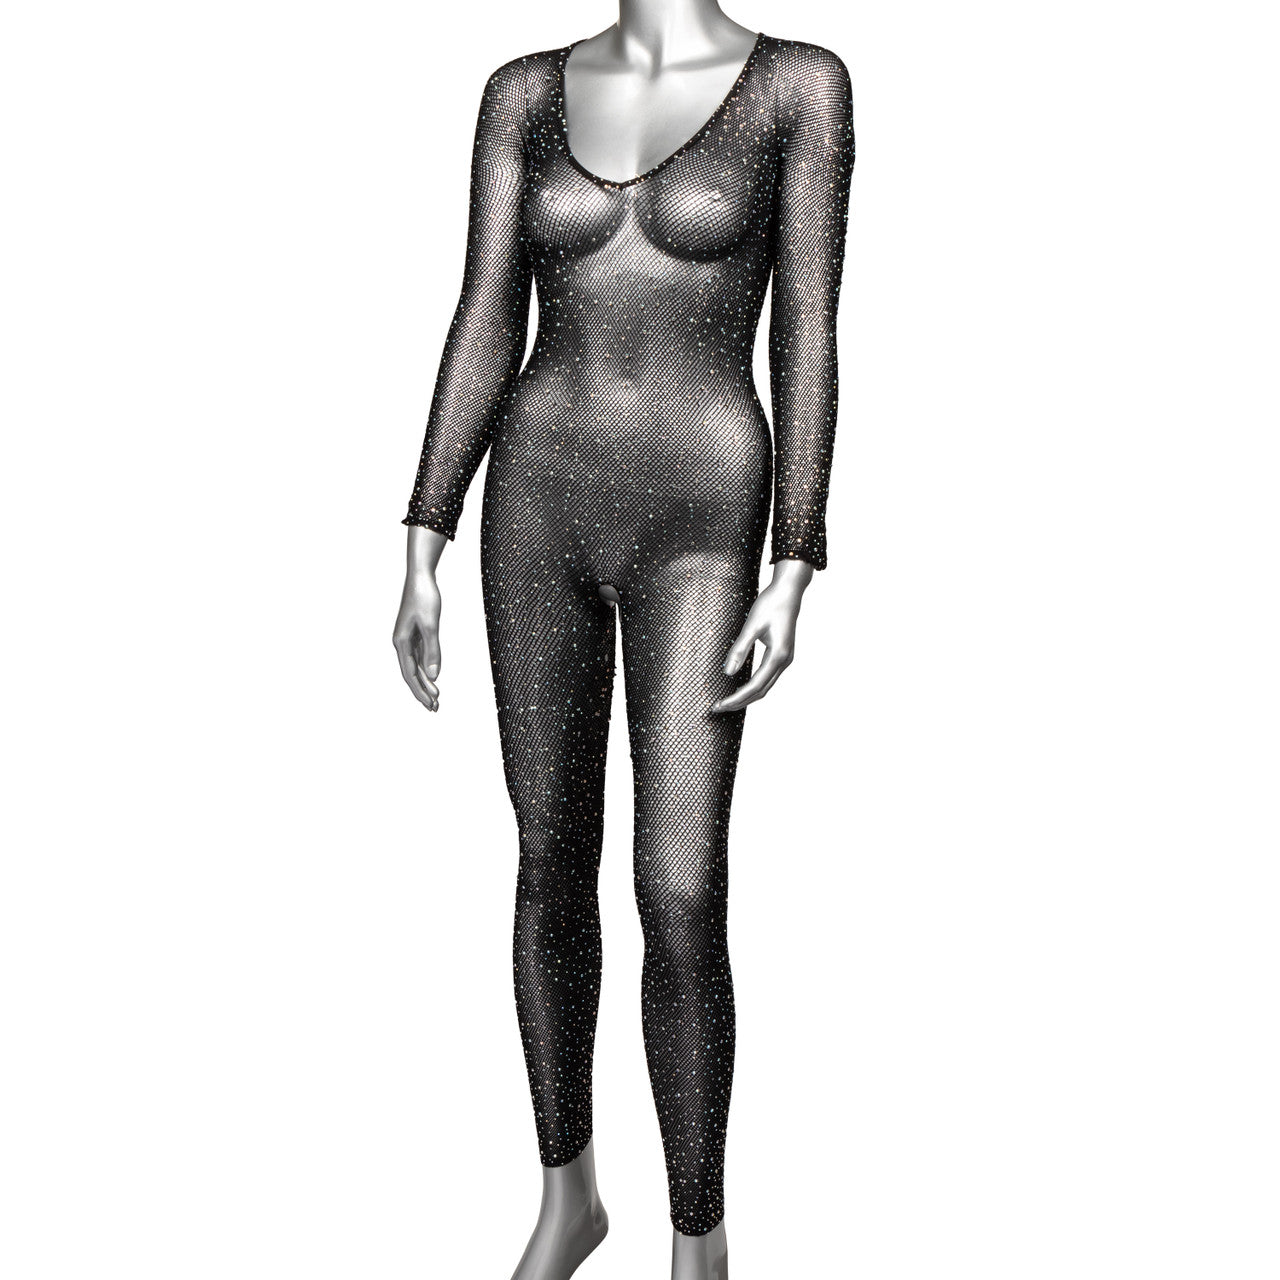 Radiance Crotchless Full Body Suit -Plus